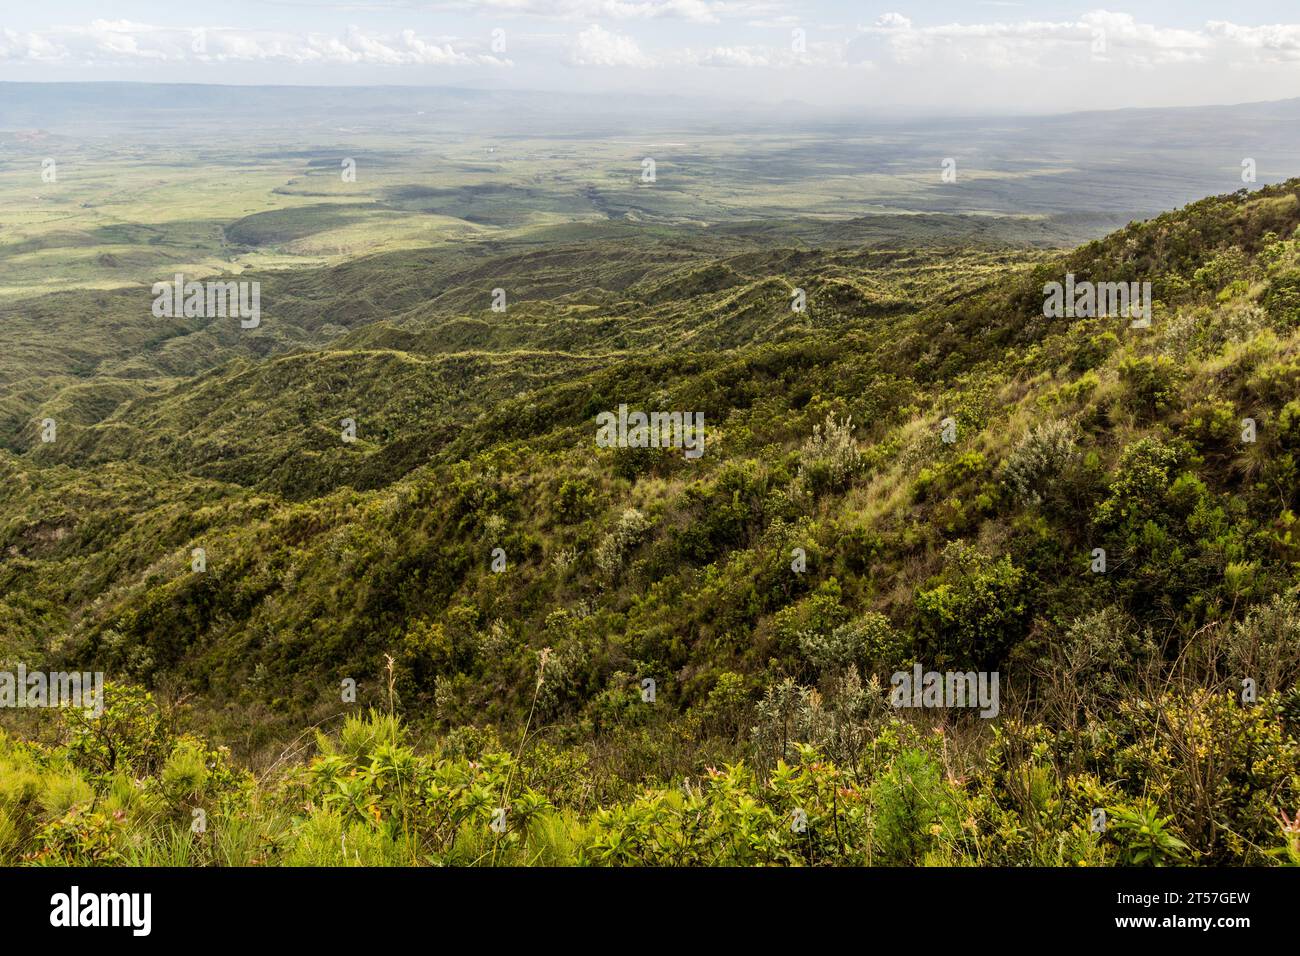 View of the Longonot National Park, Kenya Stock Photo